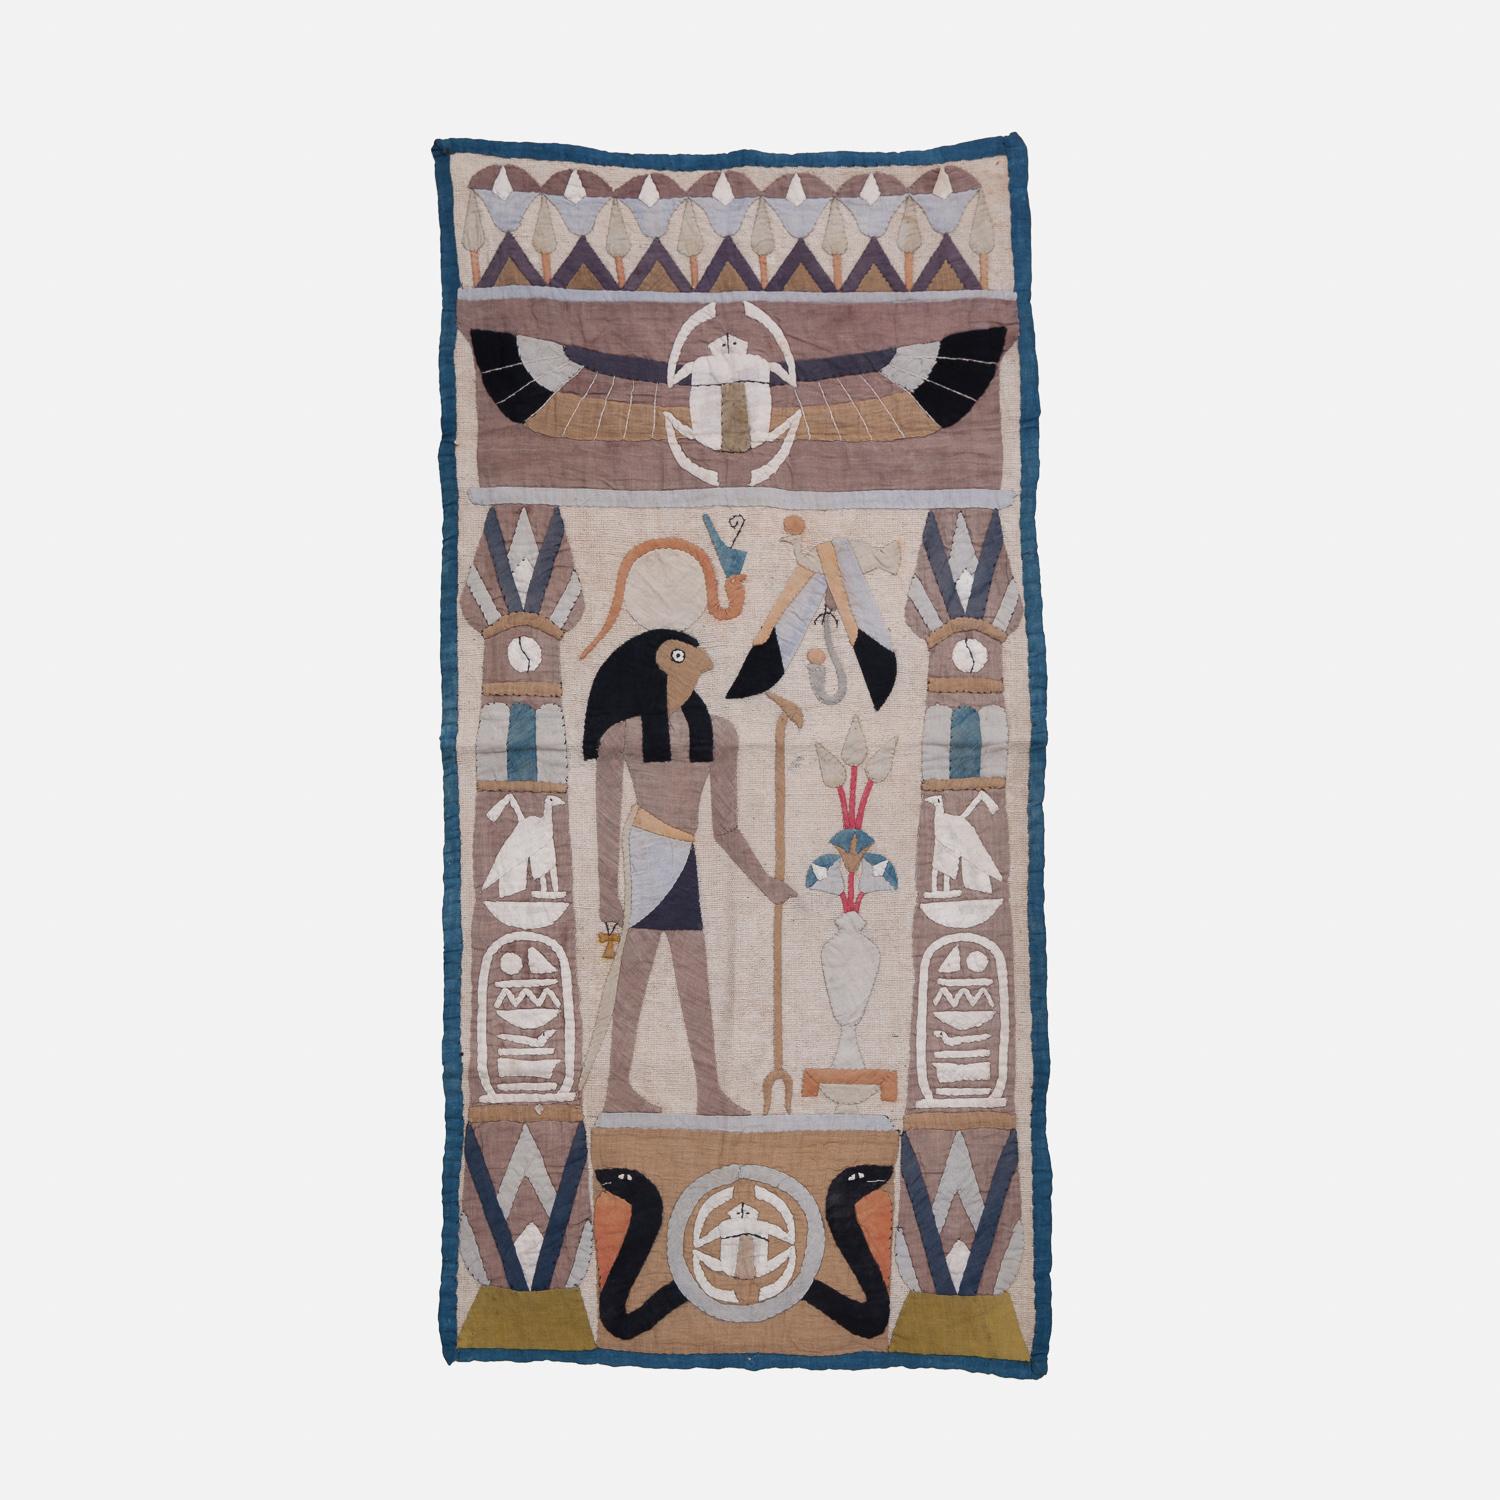 Set of three early 20th century Egyptian applique panels, depicting ancient Egyptian imagery.

All three panels have small brass eyelets in the top corners for hanging.

Measures: Small panels Height 45 cm x Width 45 cm.
Large panel Height 92